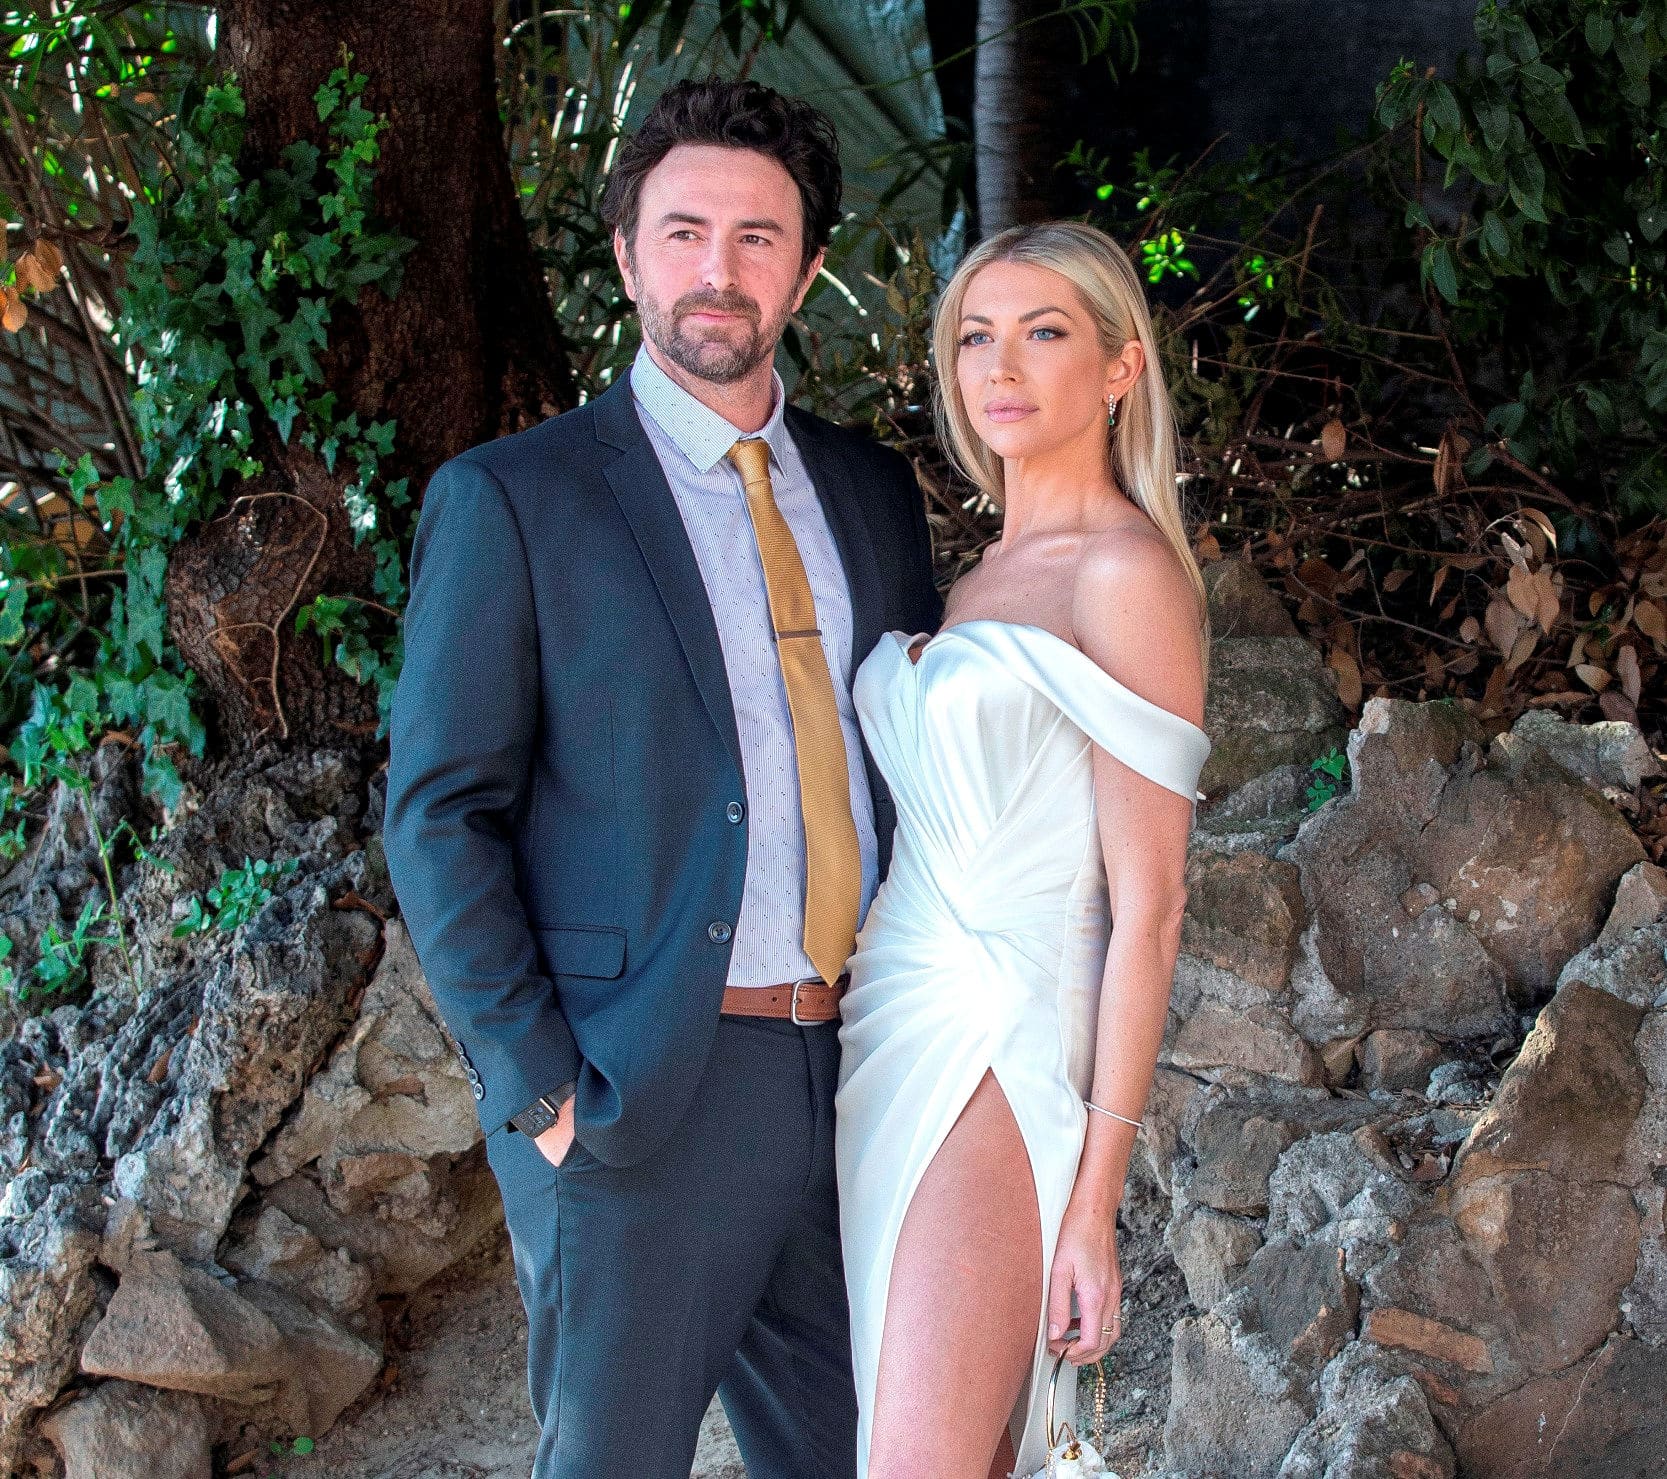 PHOTOS: Stassi Schroeder Marries Beau Clark in Rome With Daughter Hartford in Tow, See Her Wedding Dress as Katie Serves as Bridesmaid